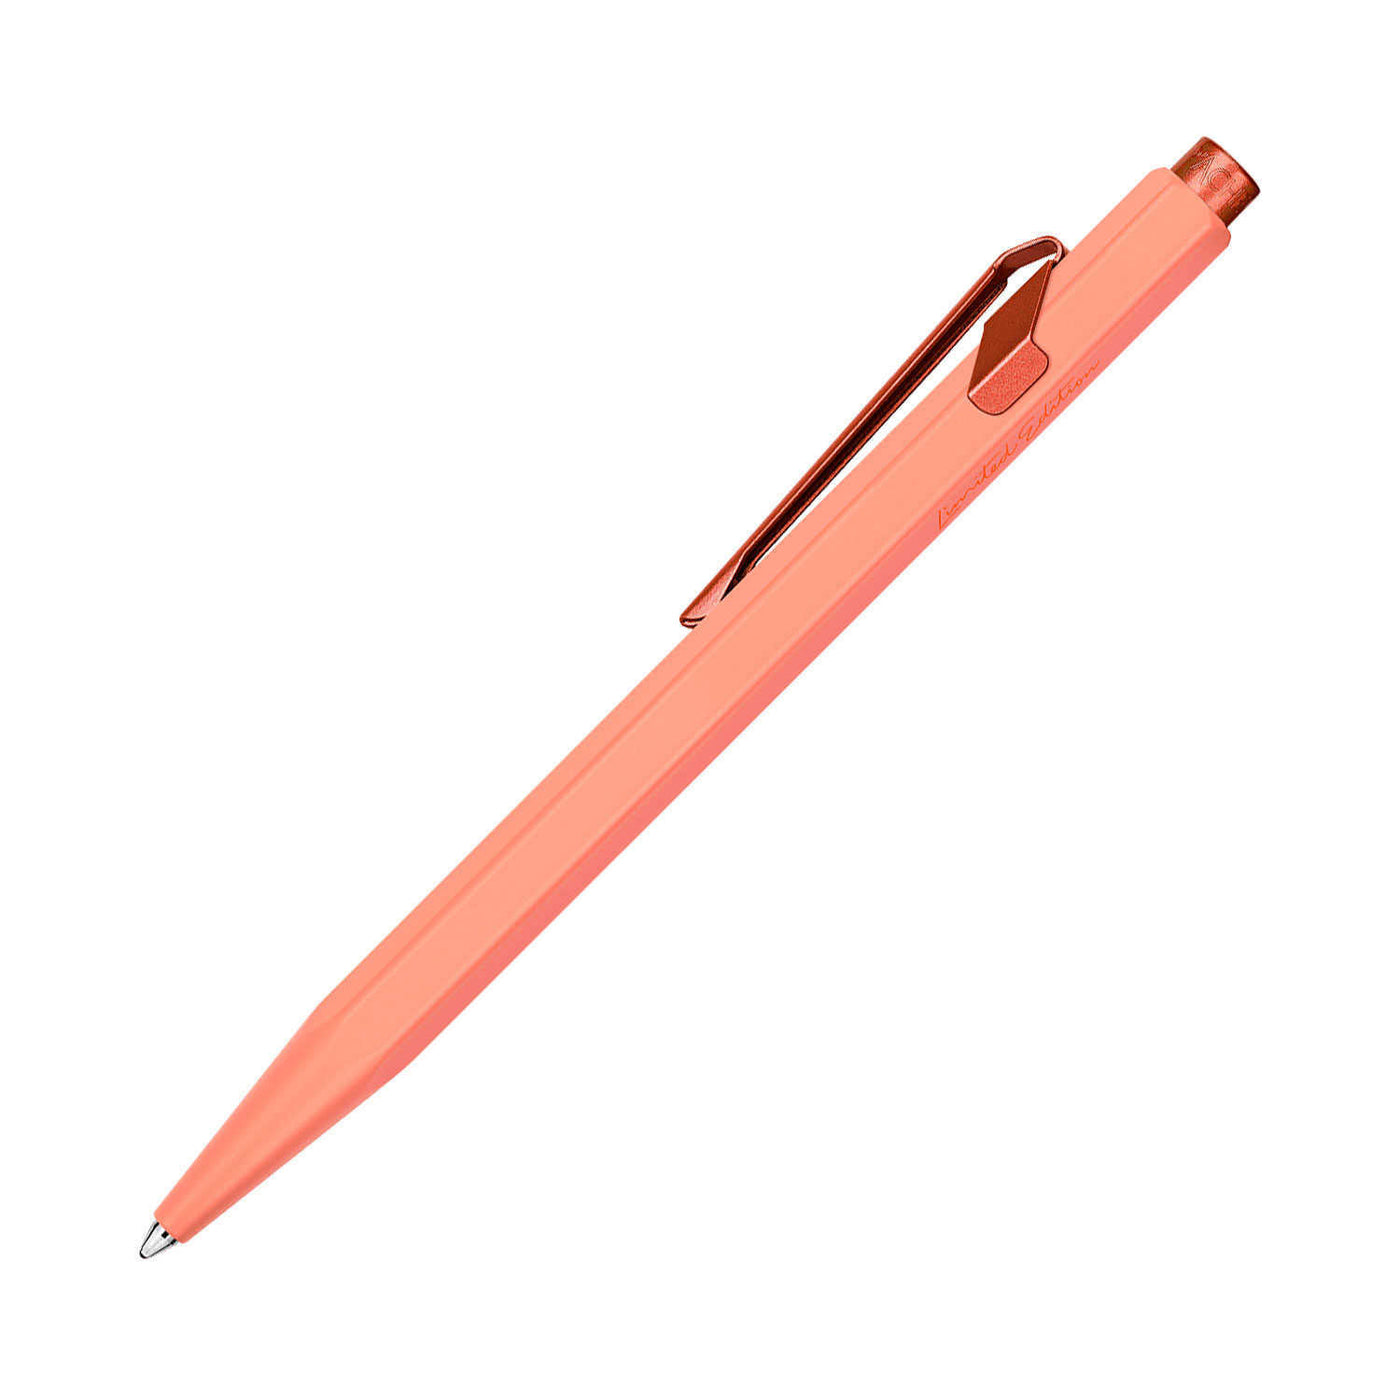 Caran d'Ache 849 Claim Your Style Ball Pen - Tangerine (Limited Edition) 3